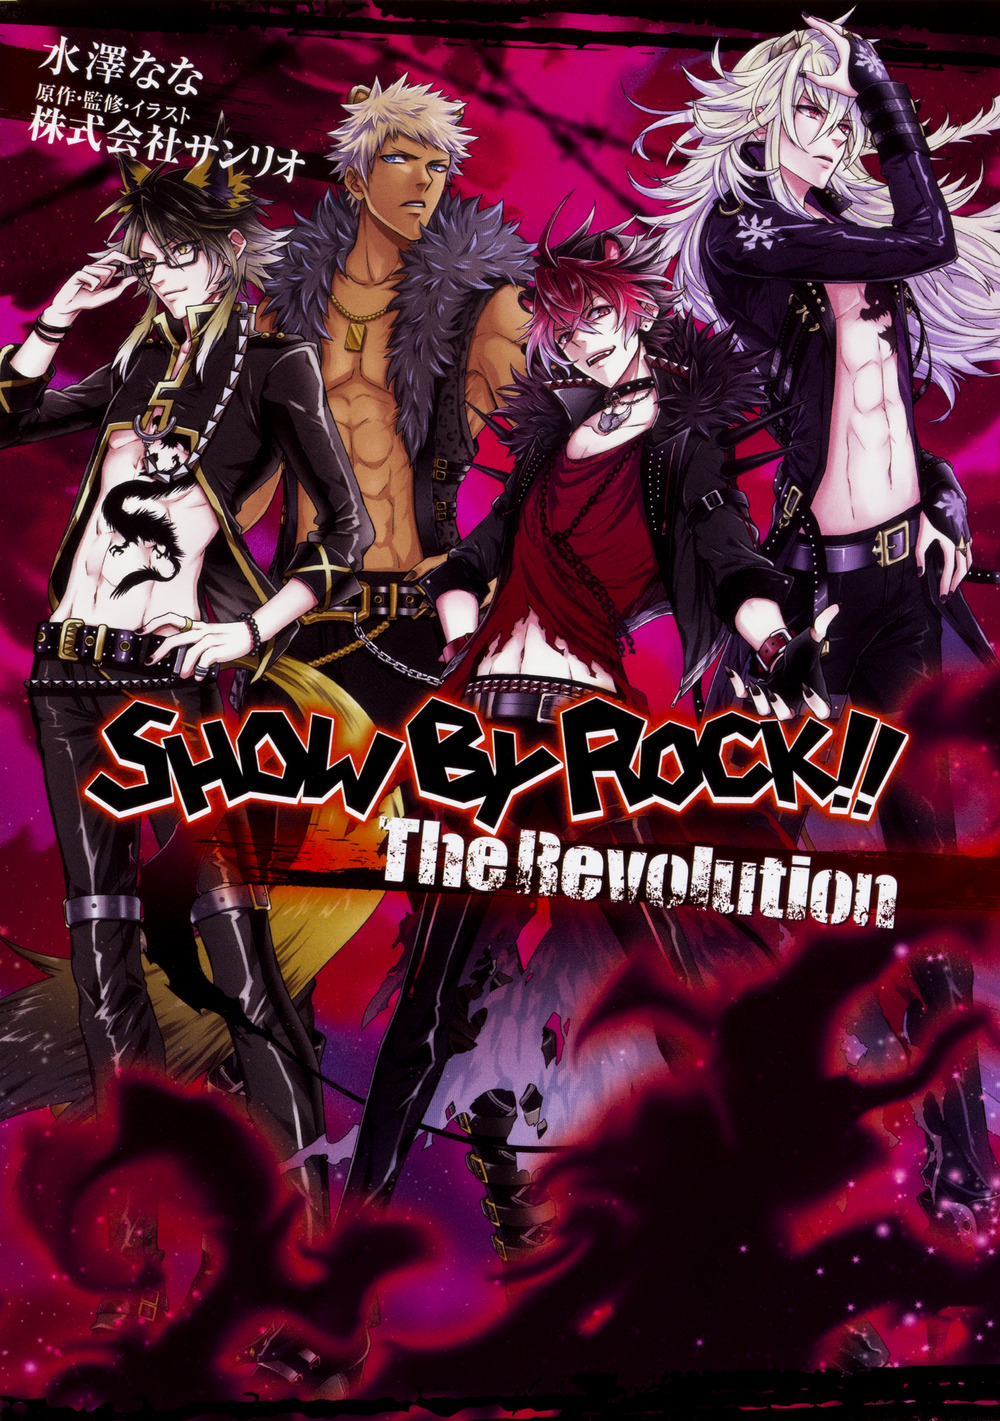 Show by Rock!!　The Revolutionの商品画像